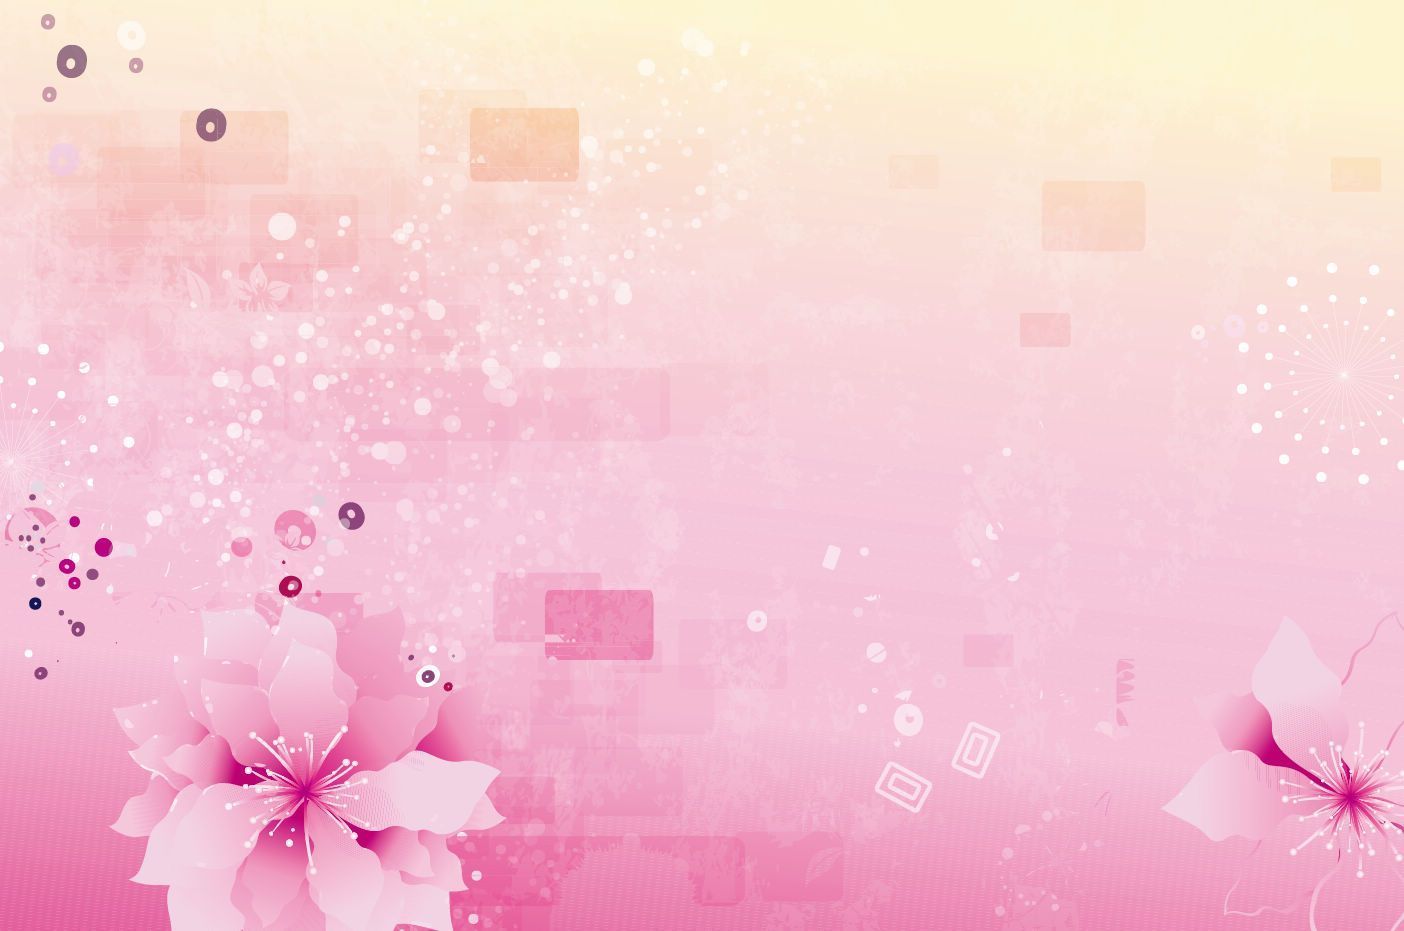 Flowers PPT Backgrounds Templates - Download Free Flowers